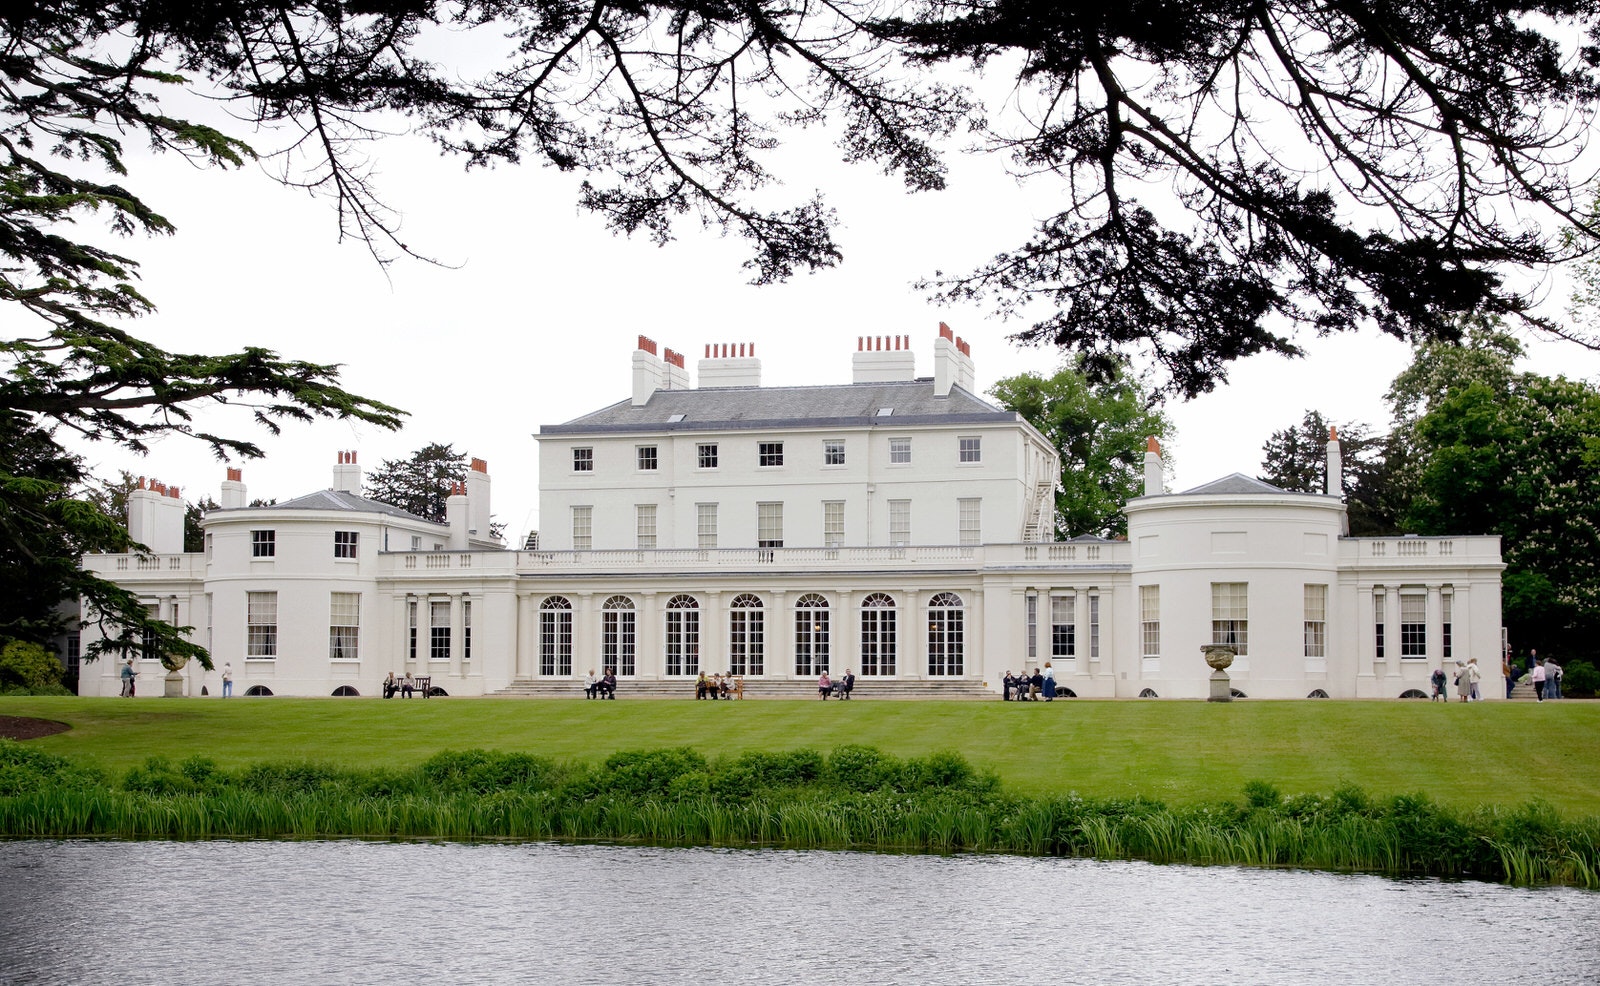 A grand palace of a house stands behind a large pond, with its many chimneys, arched windows and white facade; Frogmore house hasn't hosted a royal wedding, but Harry and Meghan's reception © Max Mumby / Indigo / Getty Images